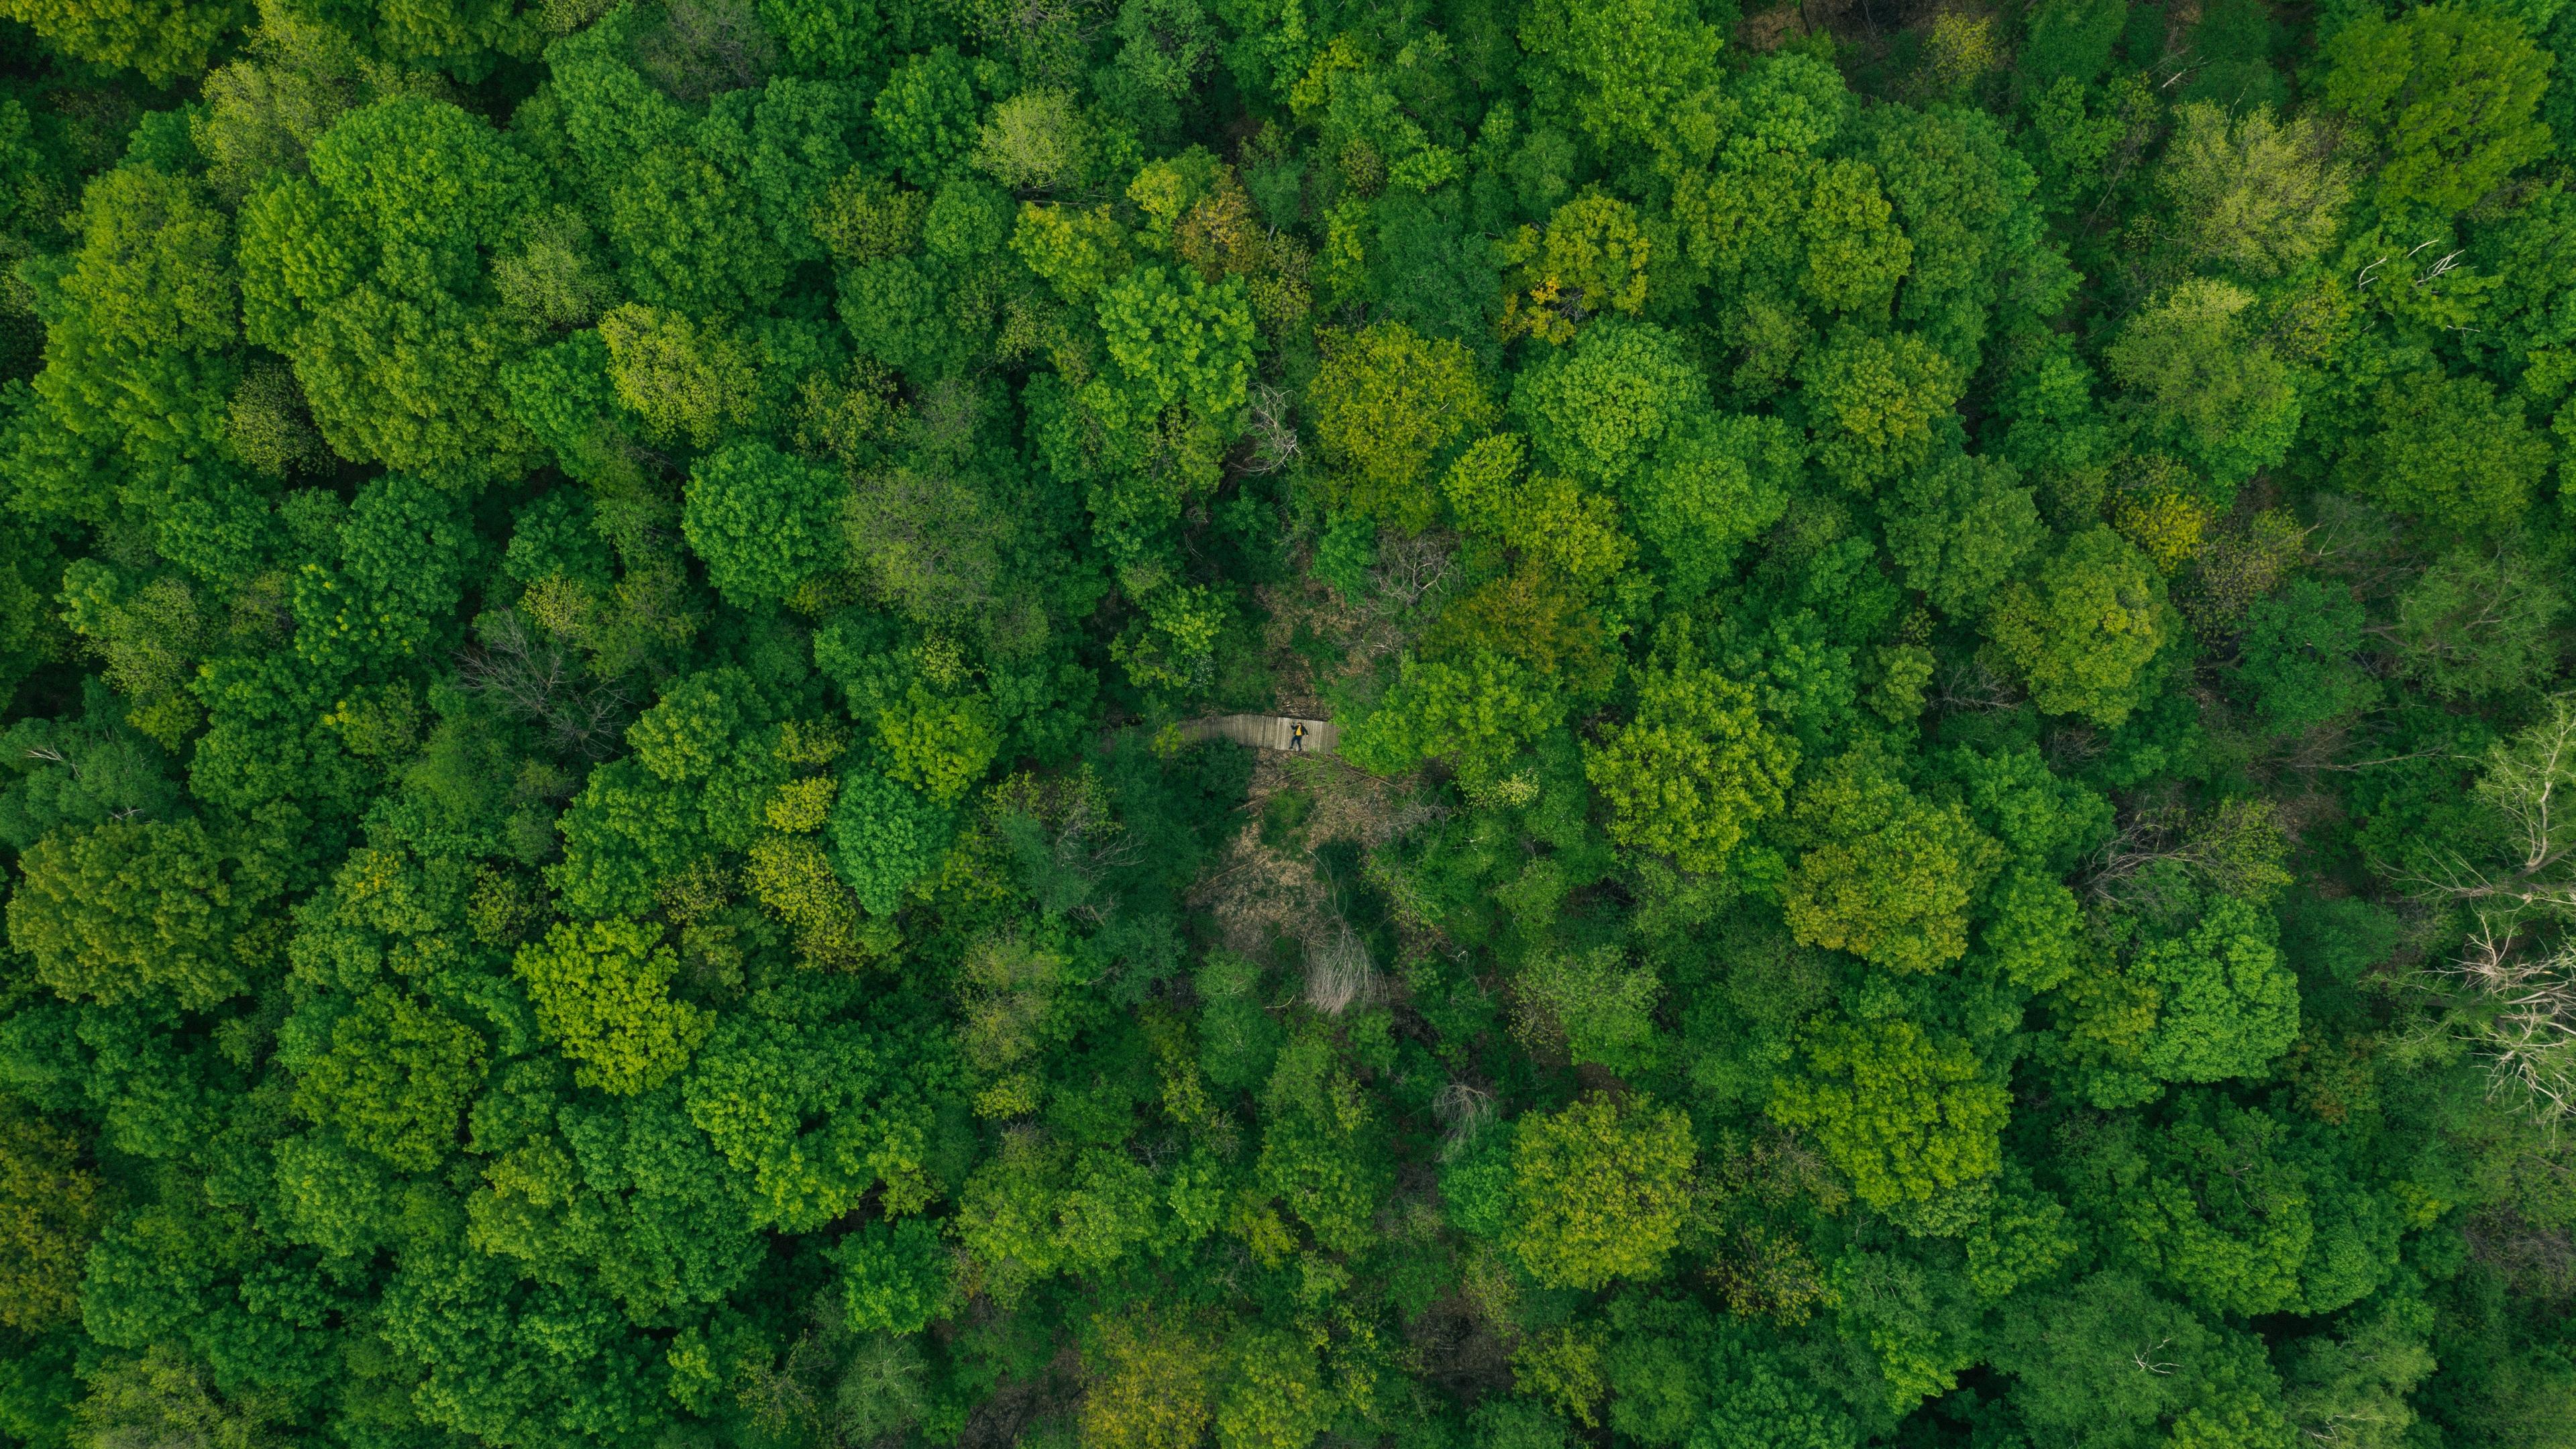 Download wallpaper 3840x2160 forest, aerial view, green